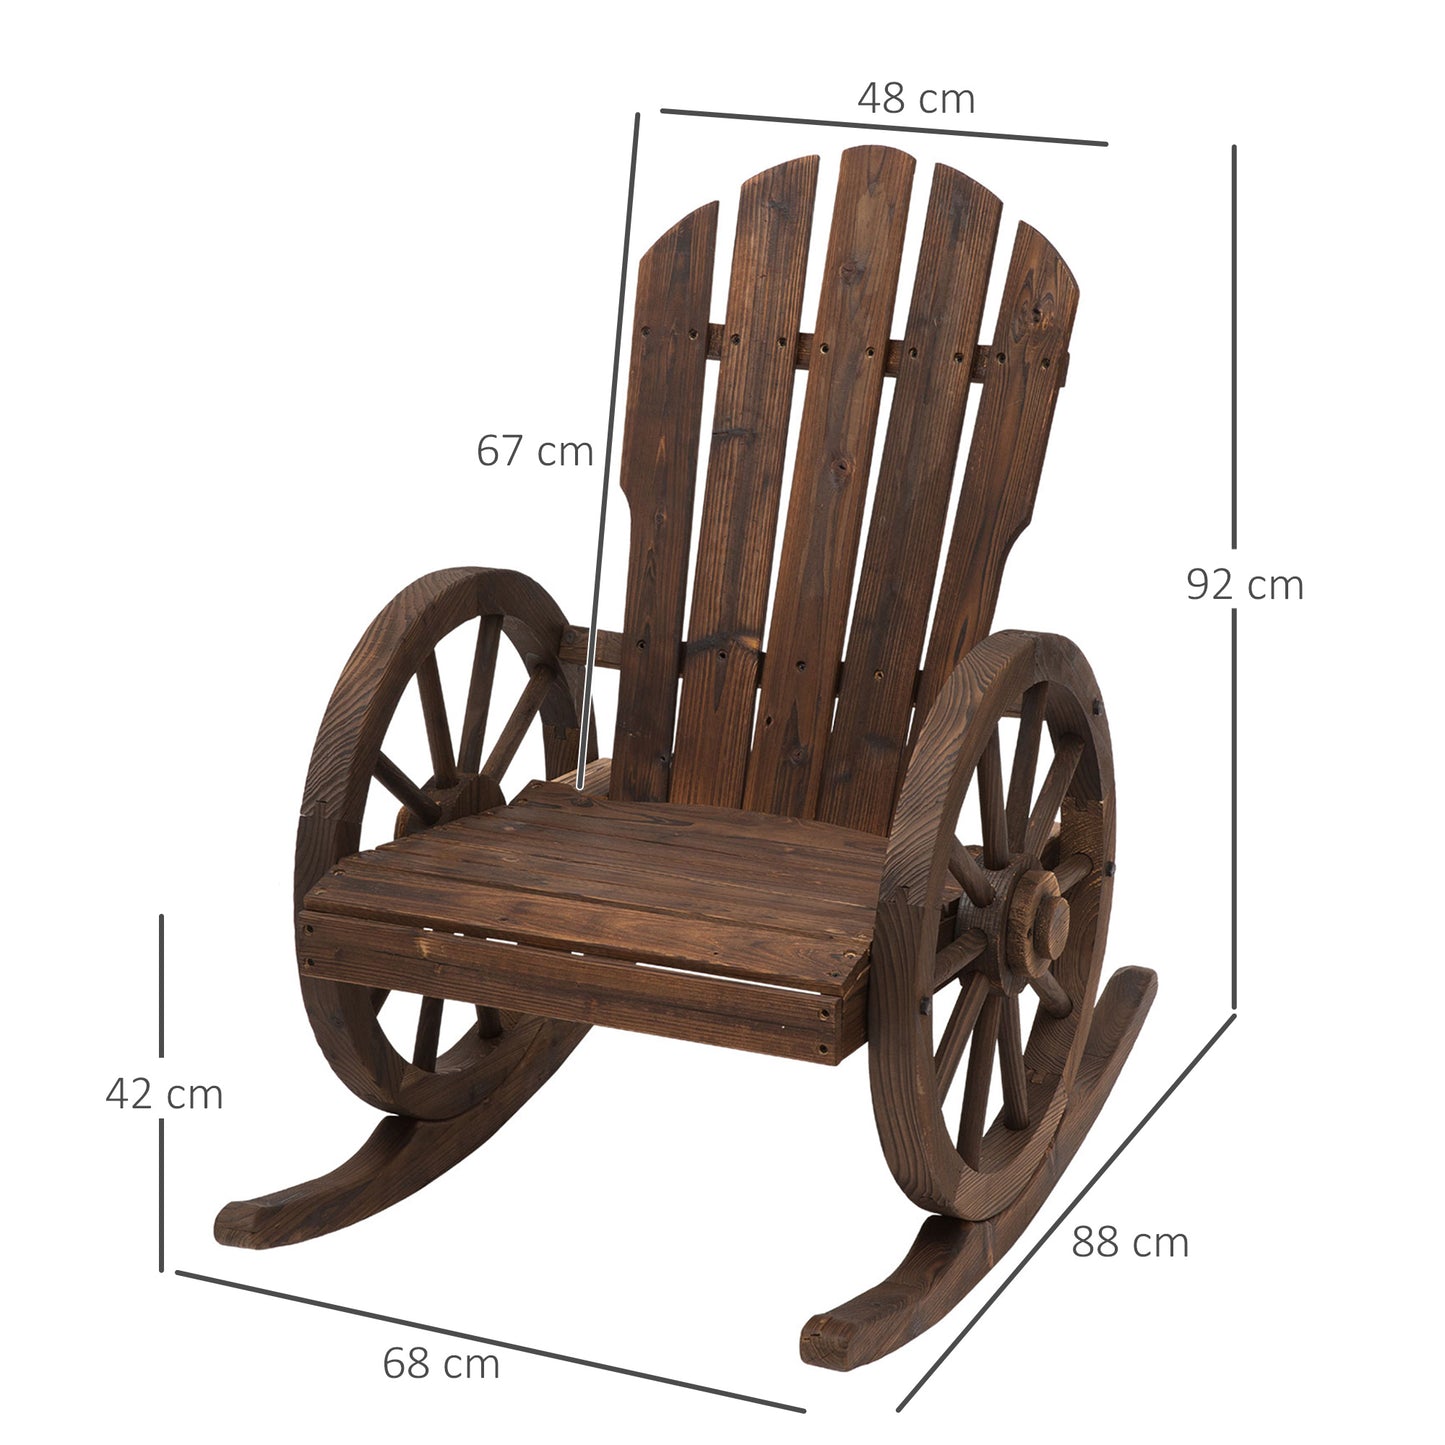 Outsunny Wooden Adirondack  Rocking Chair Reclining Armchair Outdoor Garden Furniture Patio Porch Rocker - Carbonized Wood Colour